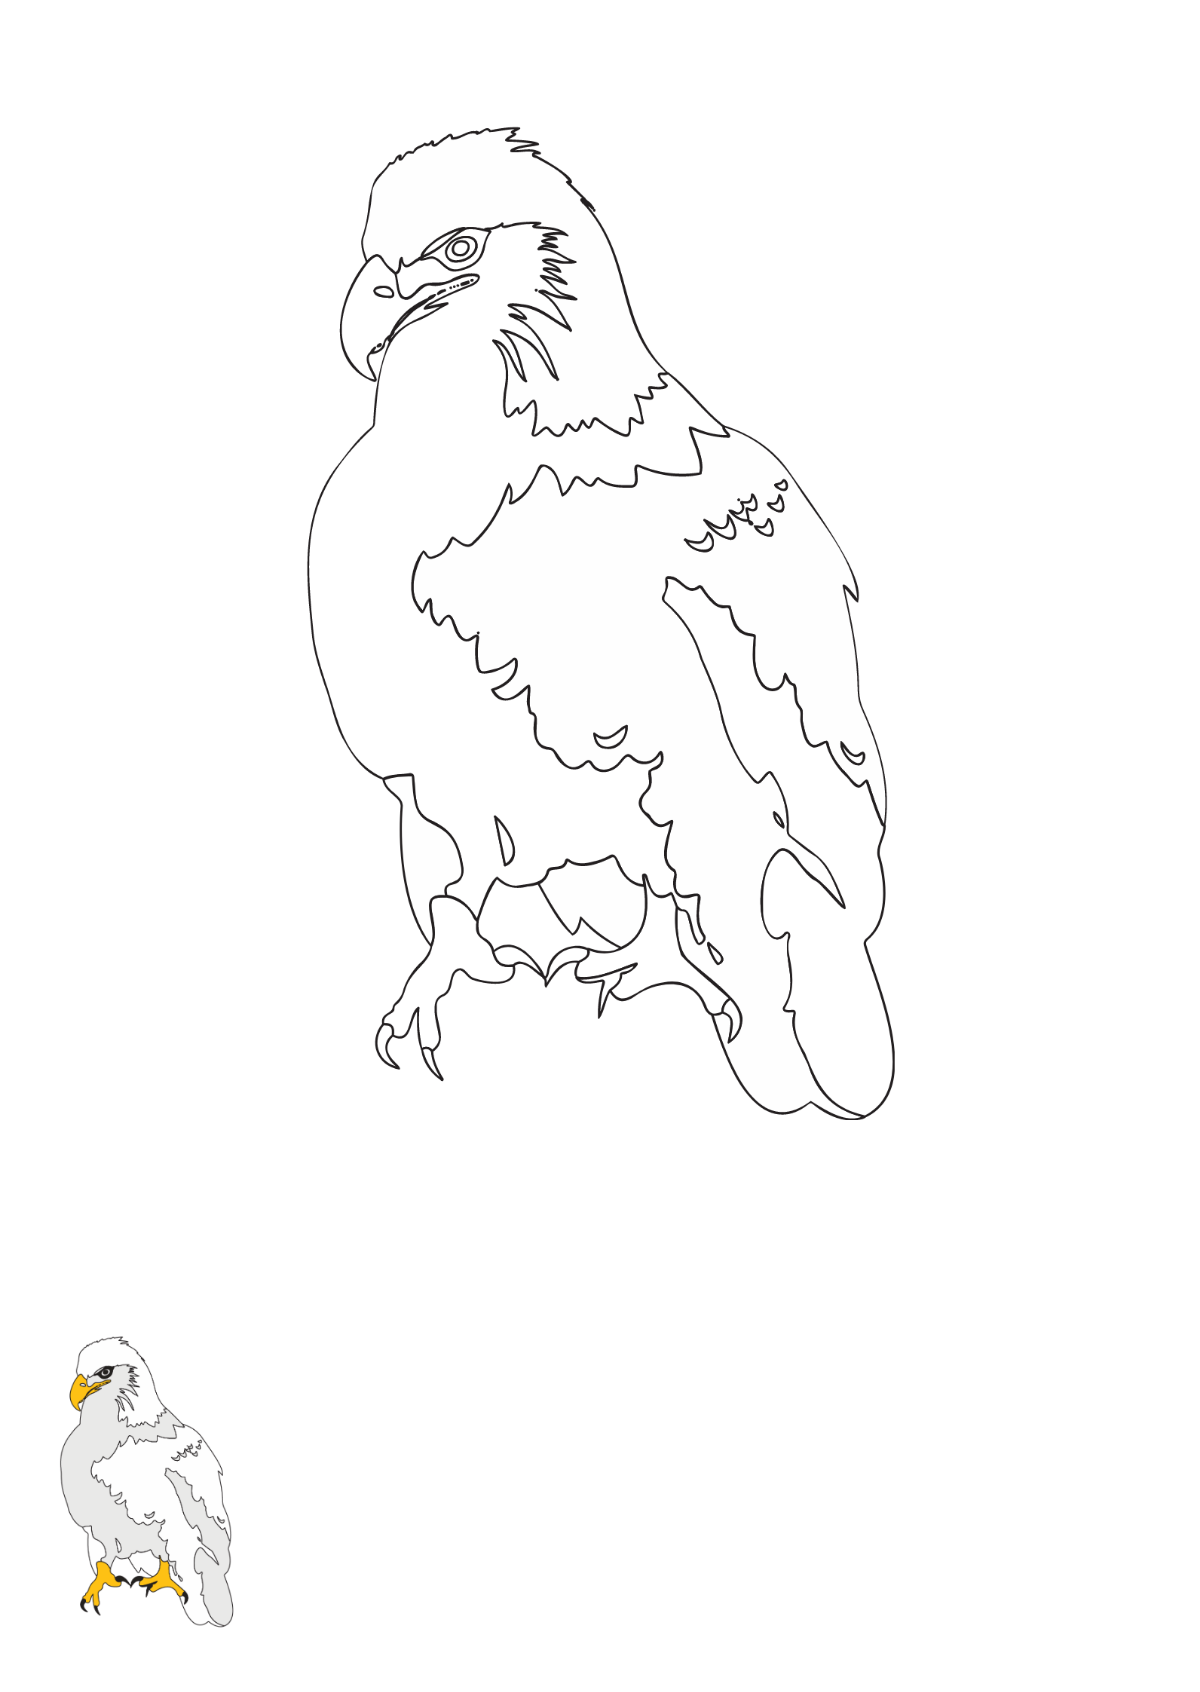 Standing Eagle coloring page Template